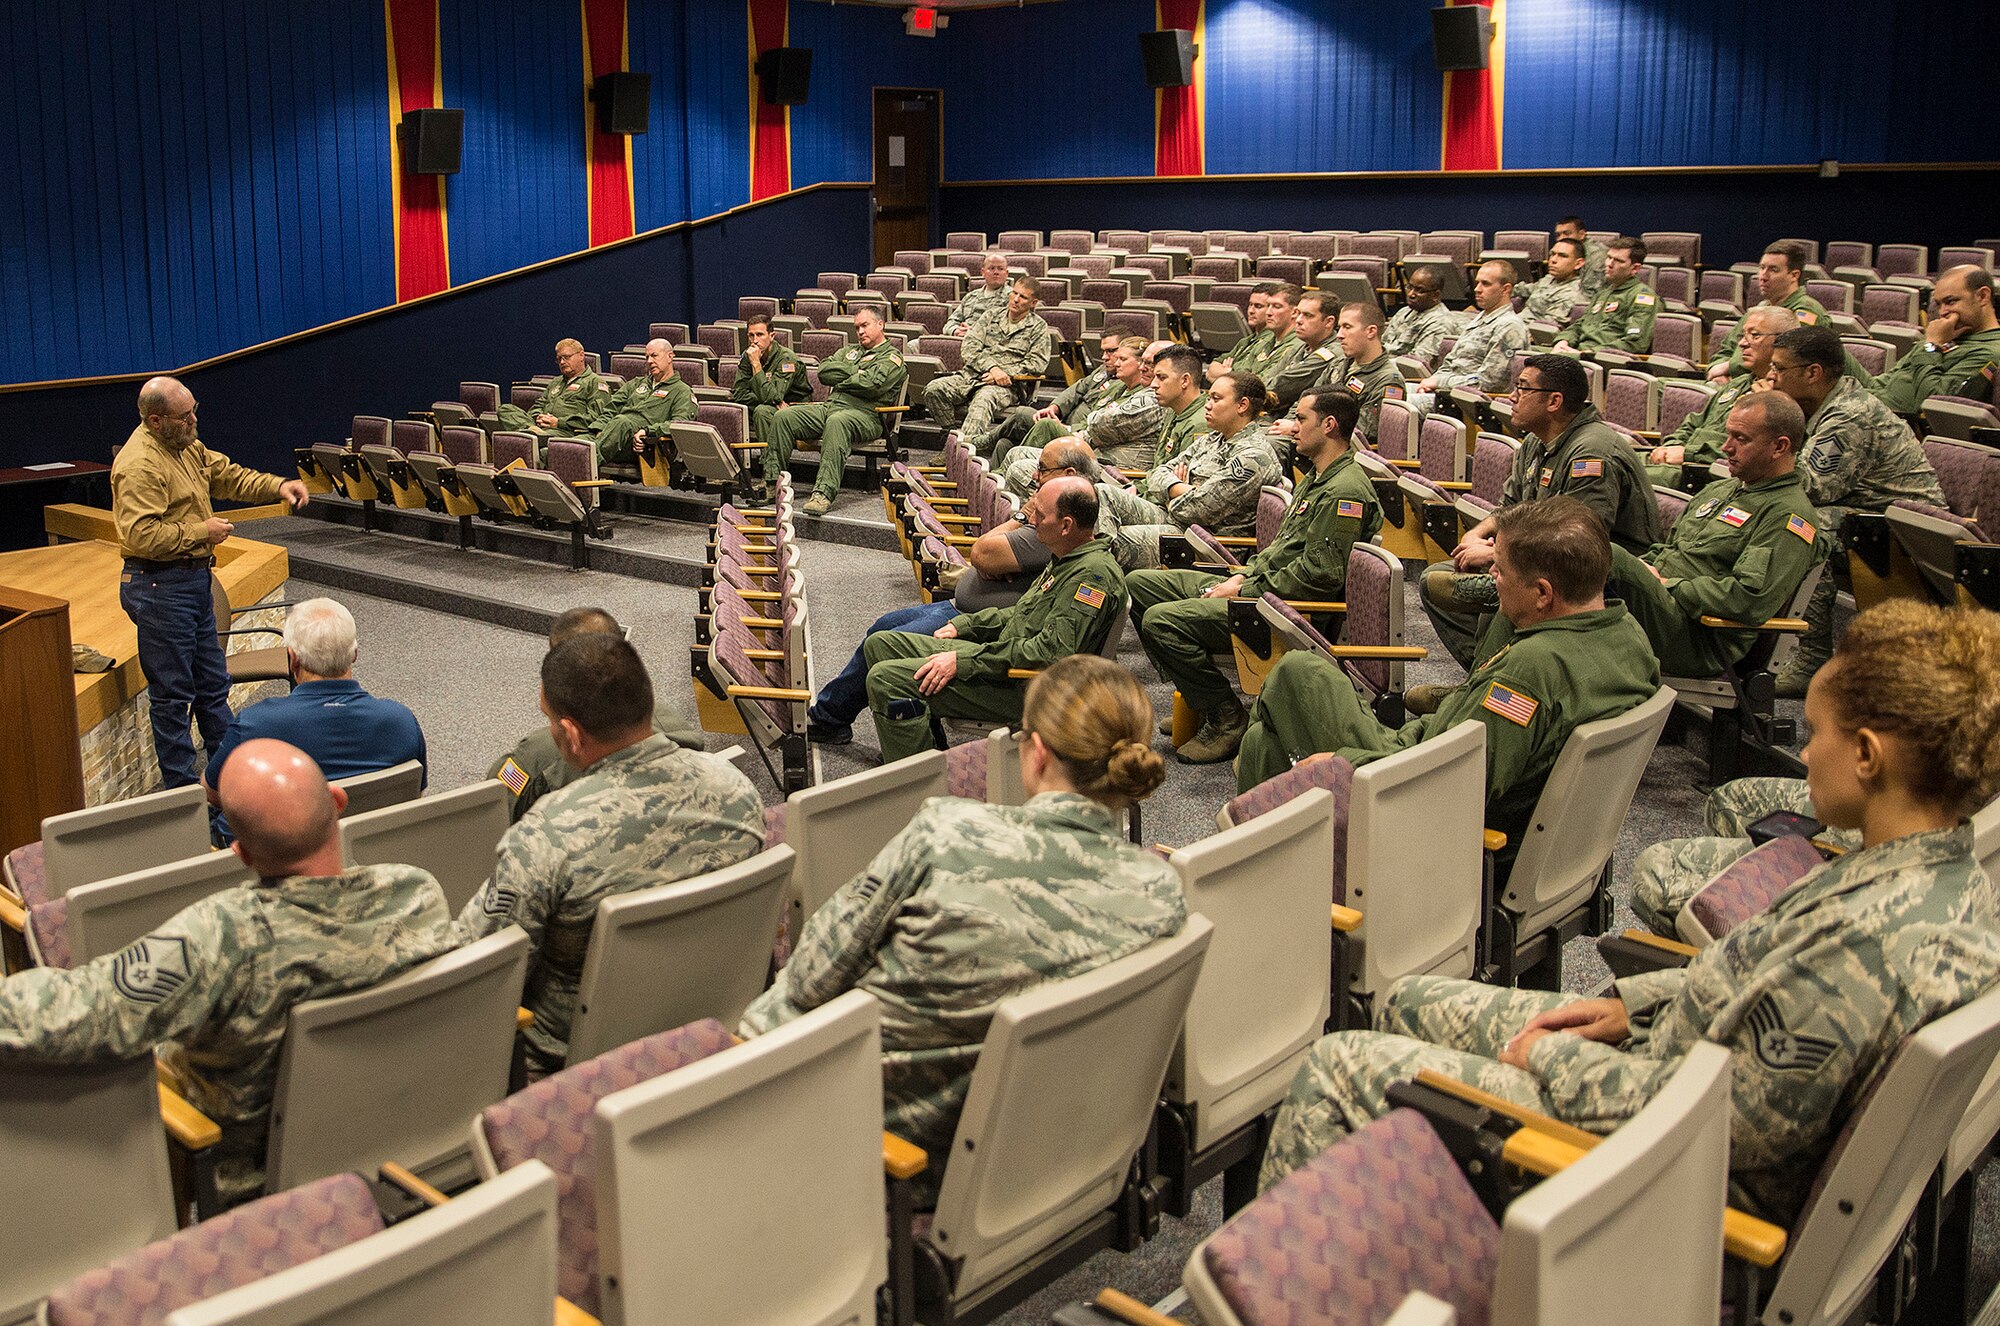 Thomas Hamill, speaks to members of the 433rd Airlift Wing April 13, 2017 at Joint Base San Antonio-Lackland. Hamill was a government-contracted truck driver during the Iraq War in 2004, when his convoy was ambushed and he was taken prisoner for 24 days. The speech focused on being resilient and never giving up in the face of danger.  (U.S.  Air Force photo by Benjamin Faske)